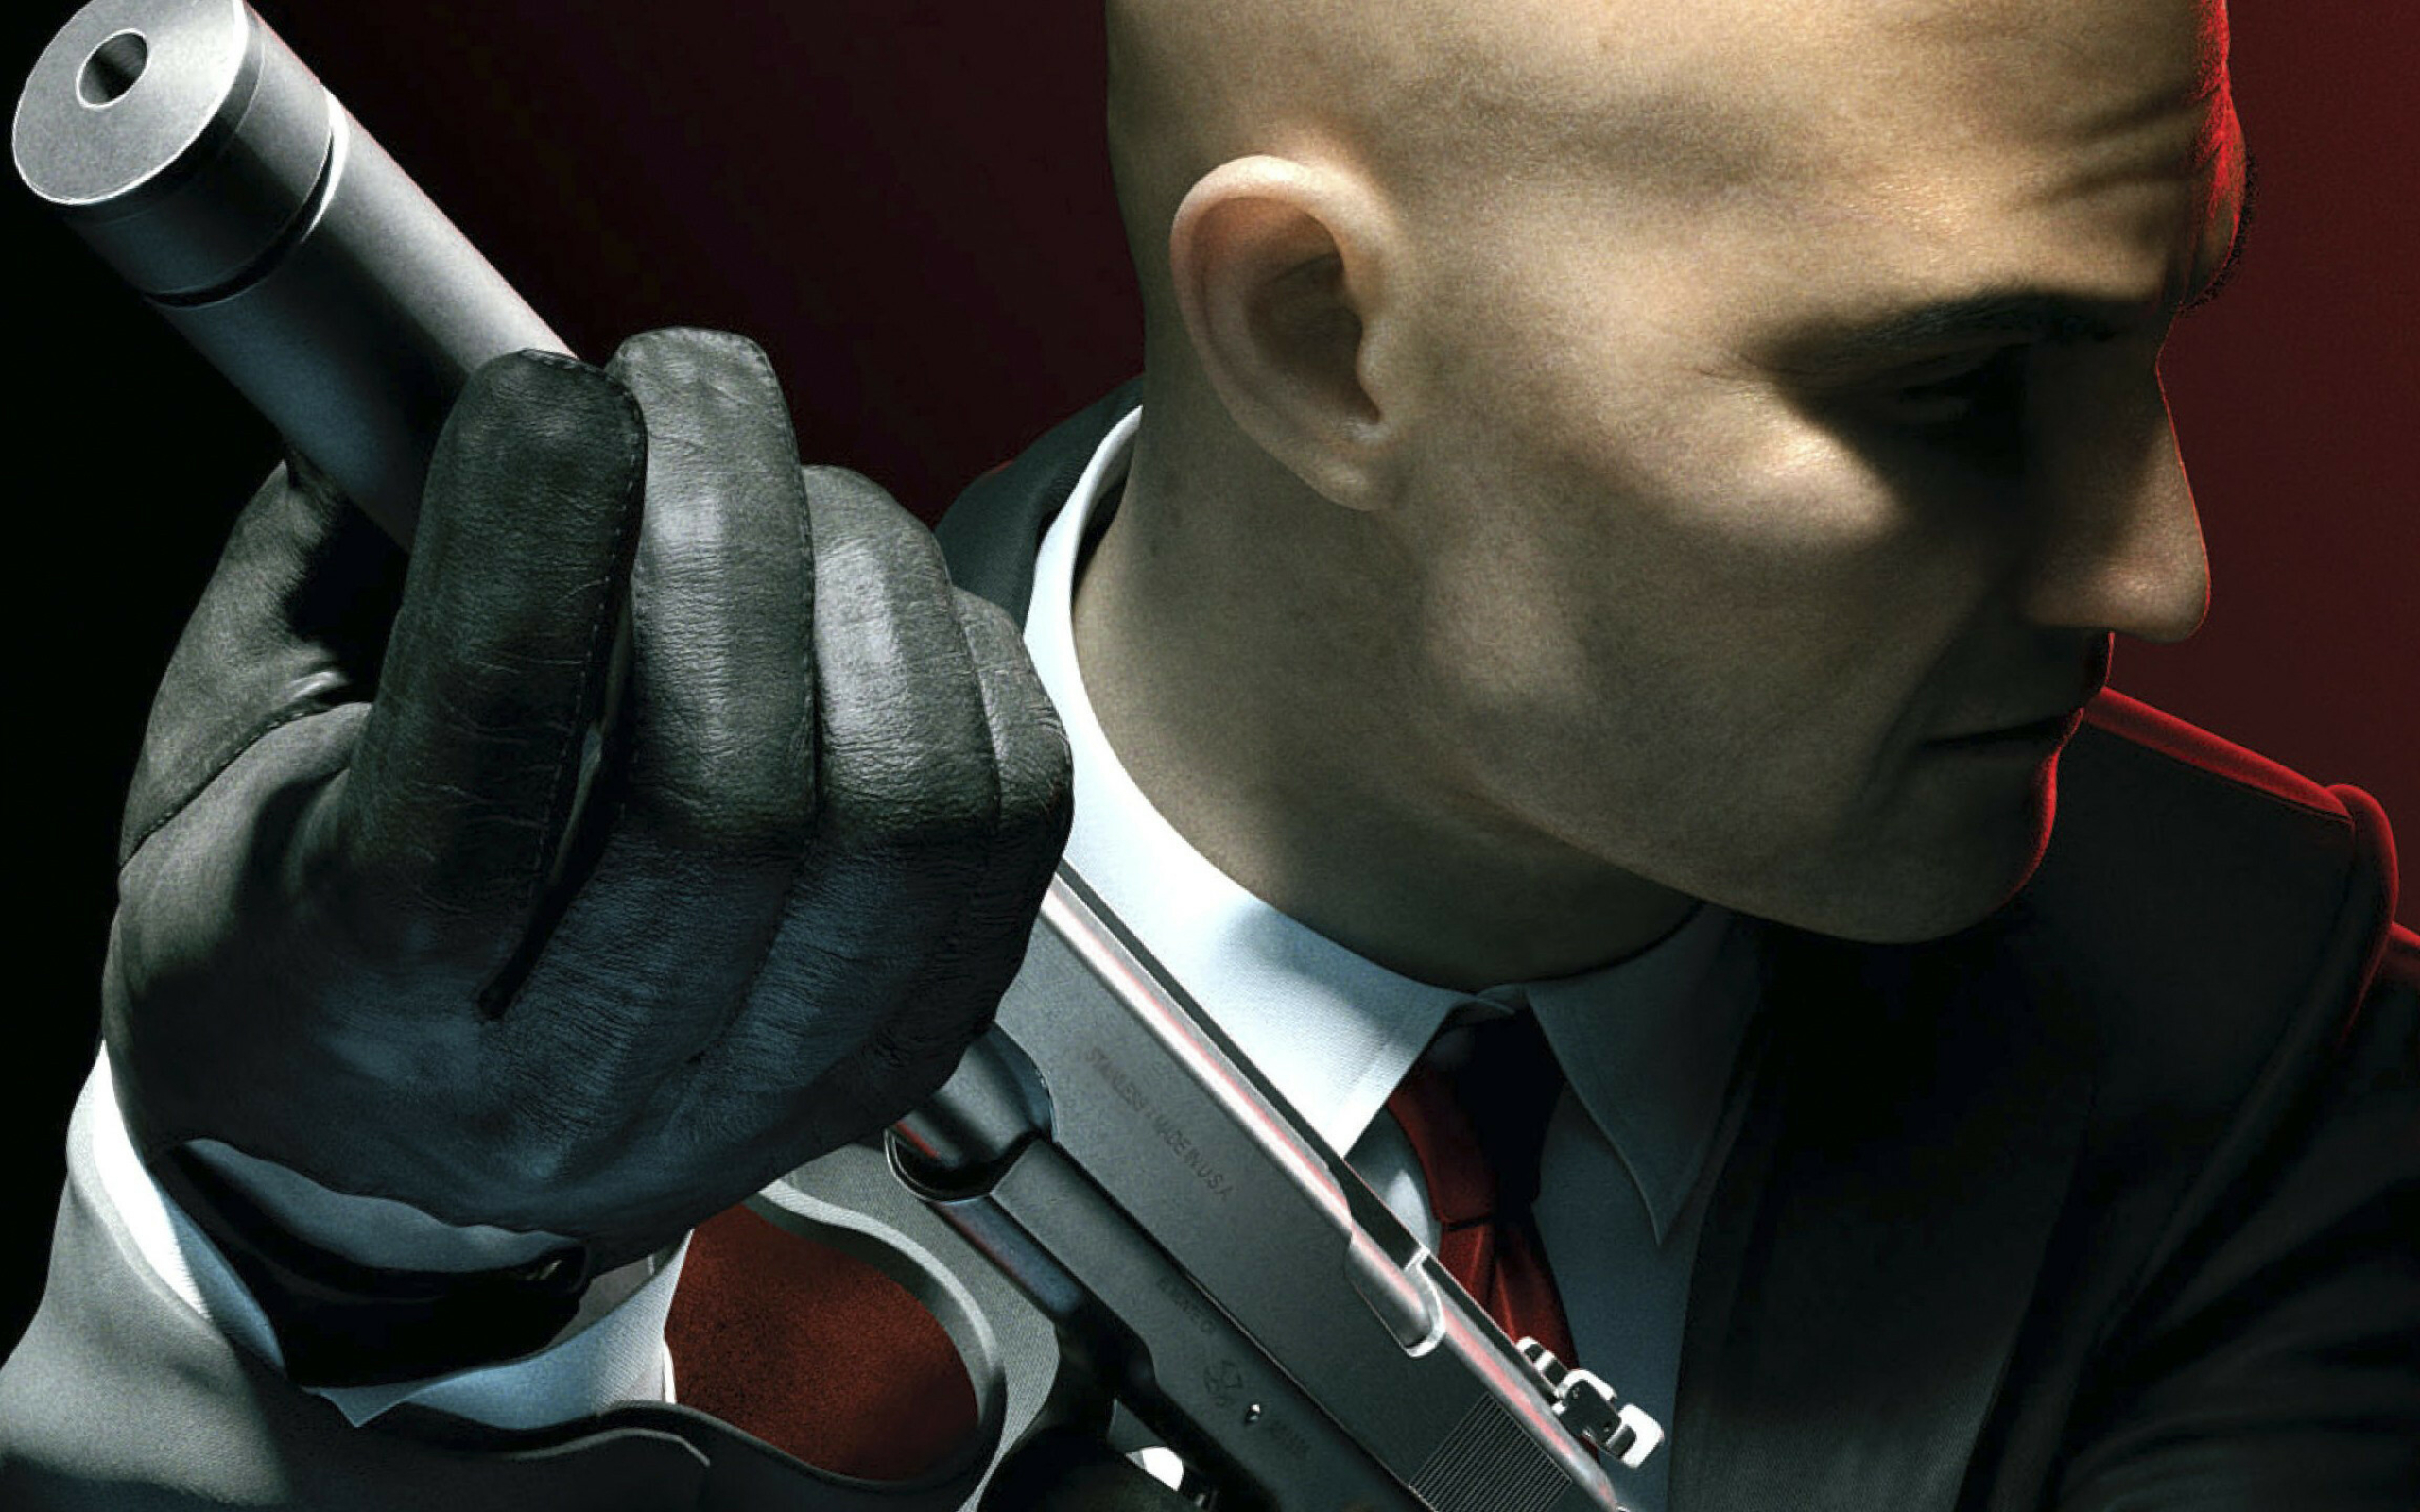 Hitman (Game): 47, works for the fictional International Contract Agency. 2560x1600 HD Wallpaper.